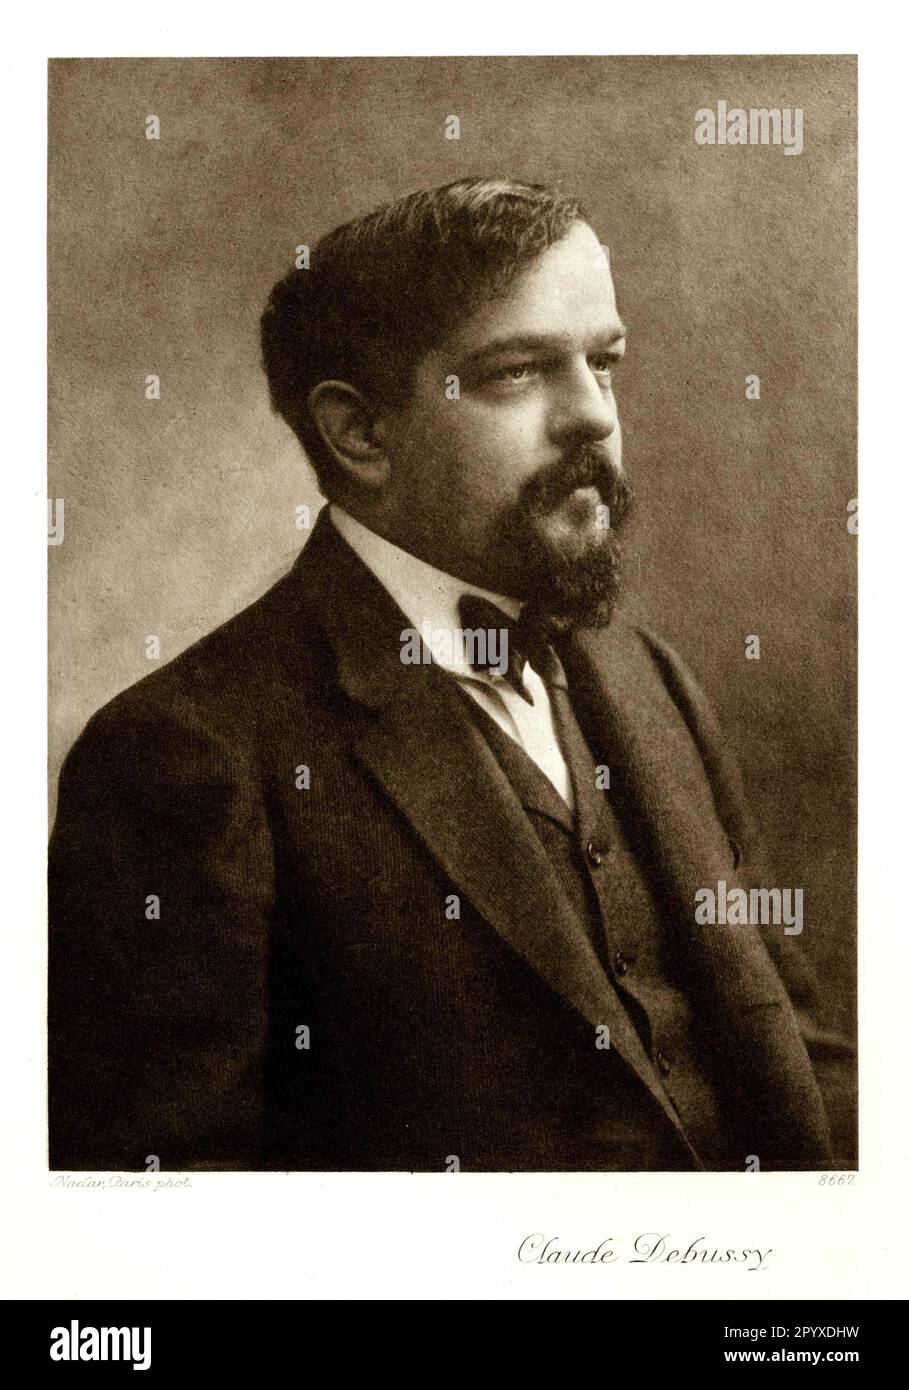 Claude Debussy (1862-1918), French composer. Photography by Nadar, Paris. Photo: Heliogravure, Corpus Imaginum, Hanfstaengl Collection. [automated translation] Stock Photo